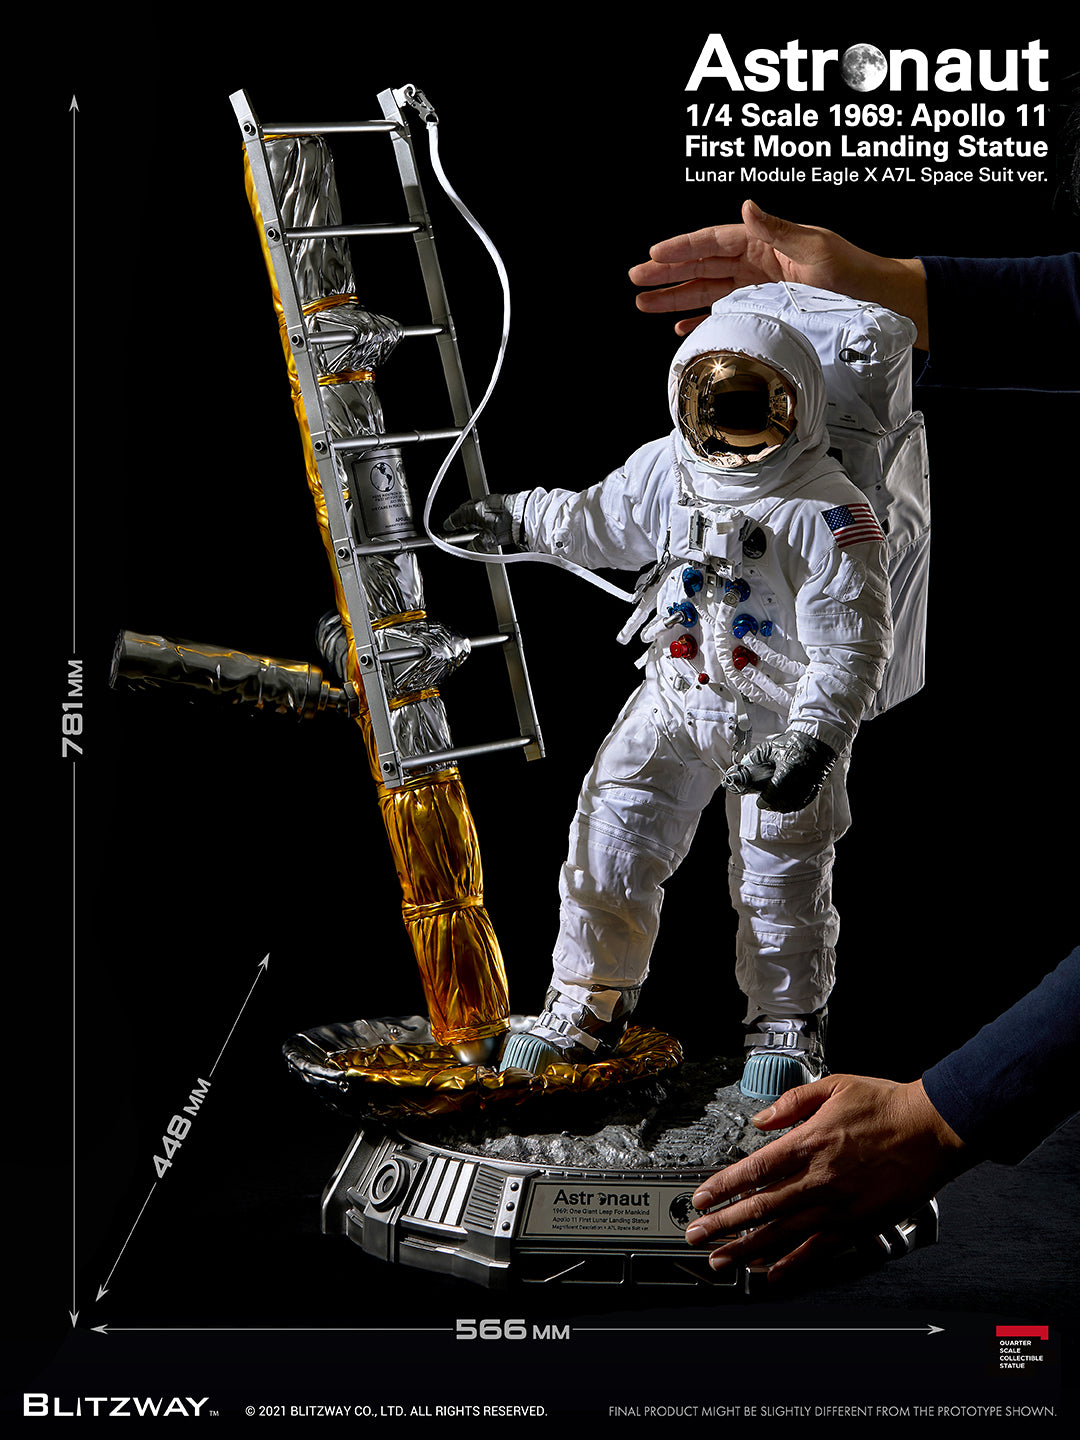 Blitzway - Superb Scale Statue (Hybrid Type) - 1969: Apollo 11 First Moon Landing - Astronaut Statue (LM-5 A7L Space Suit Ver.) (1/4 Scale) - Marvelous Toys